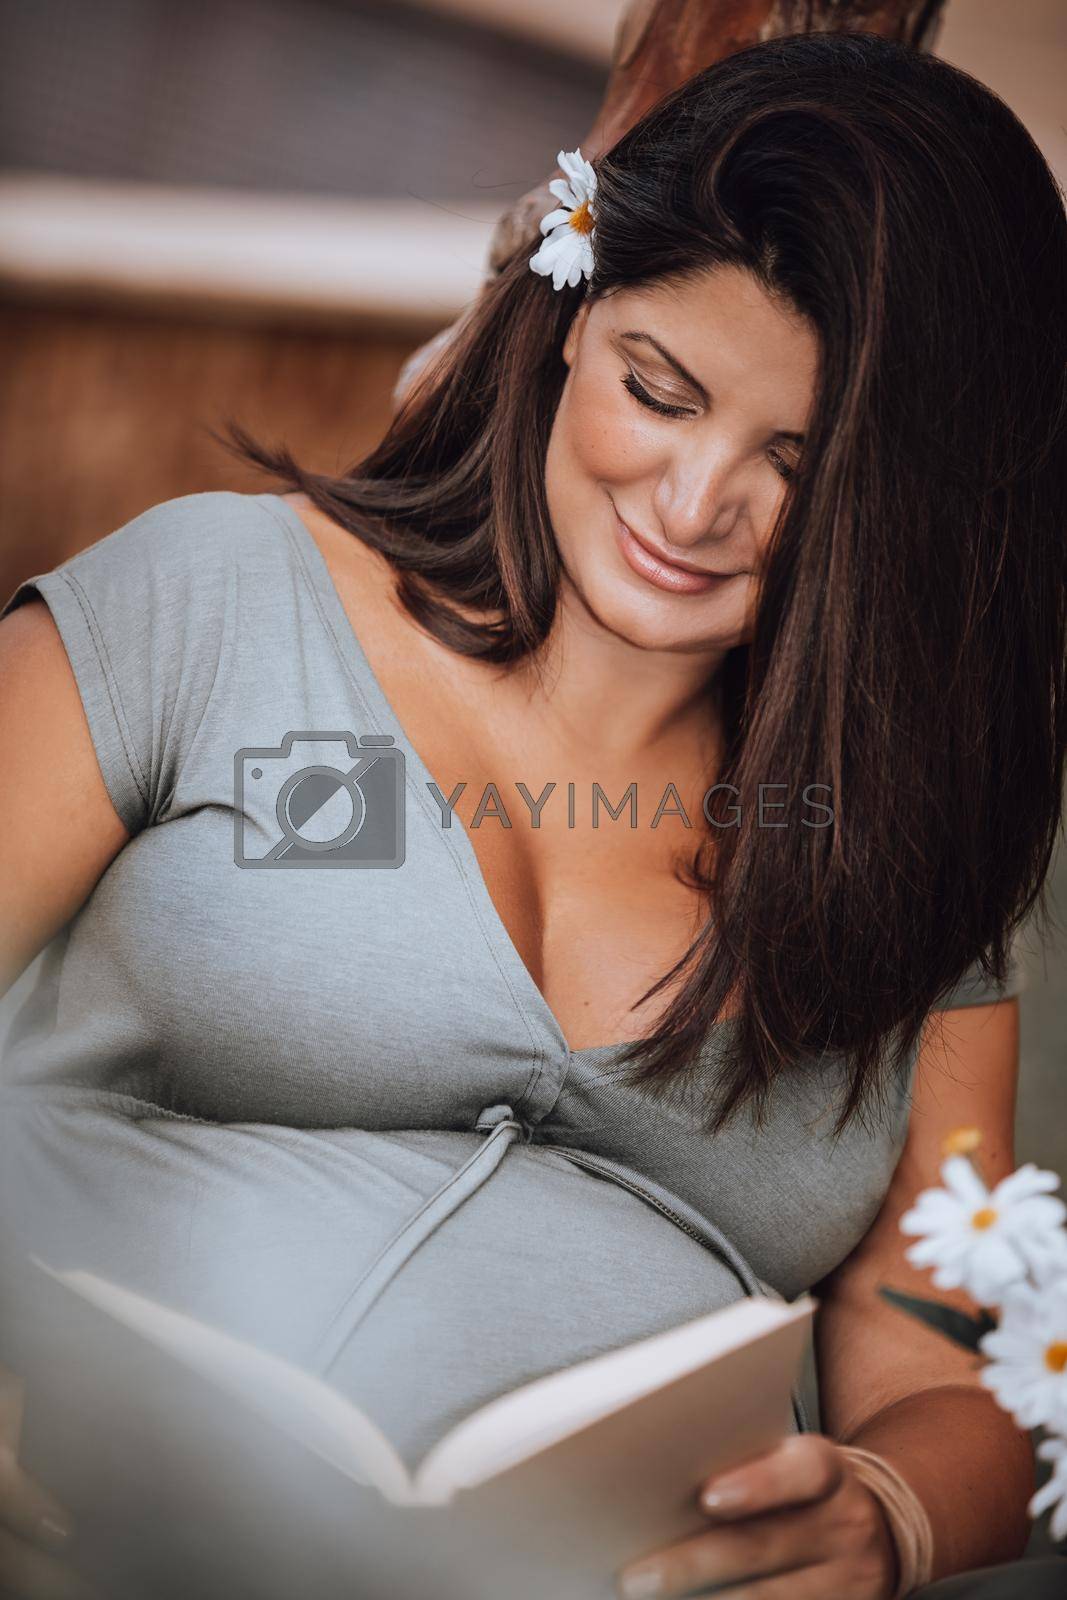 Royalty free image of Pregnant Woman Reading Book by Anna_Omelchenko